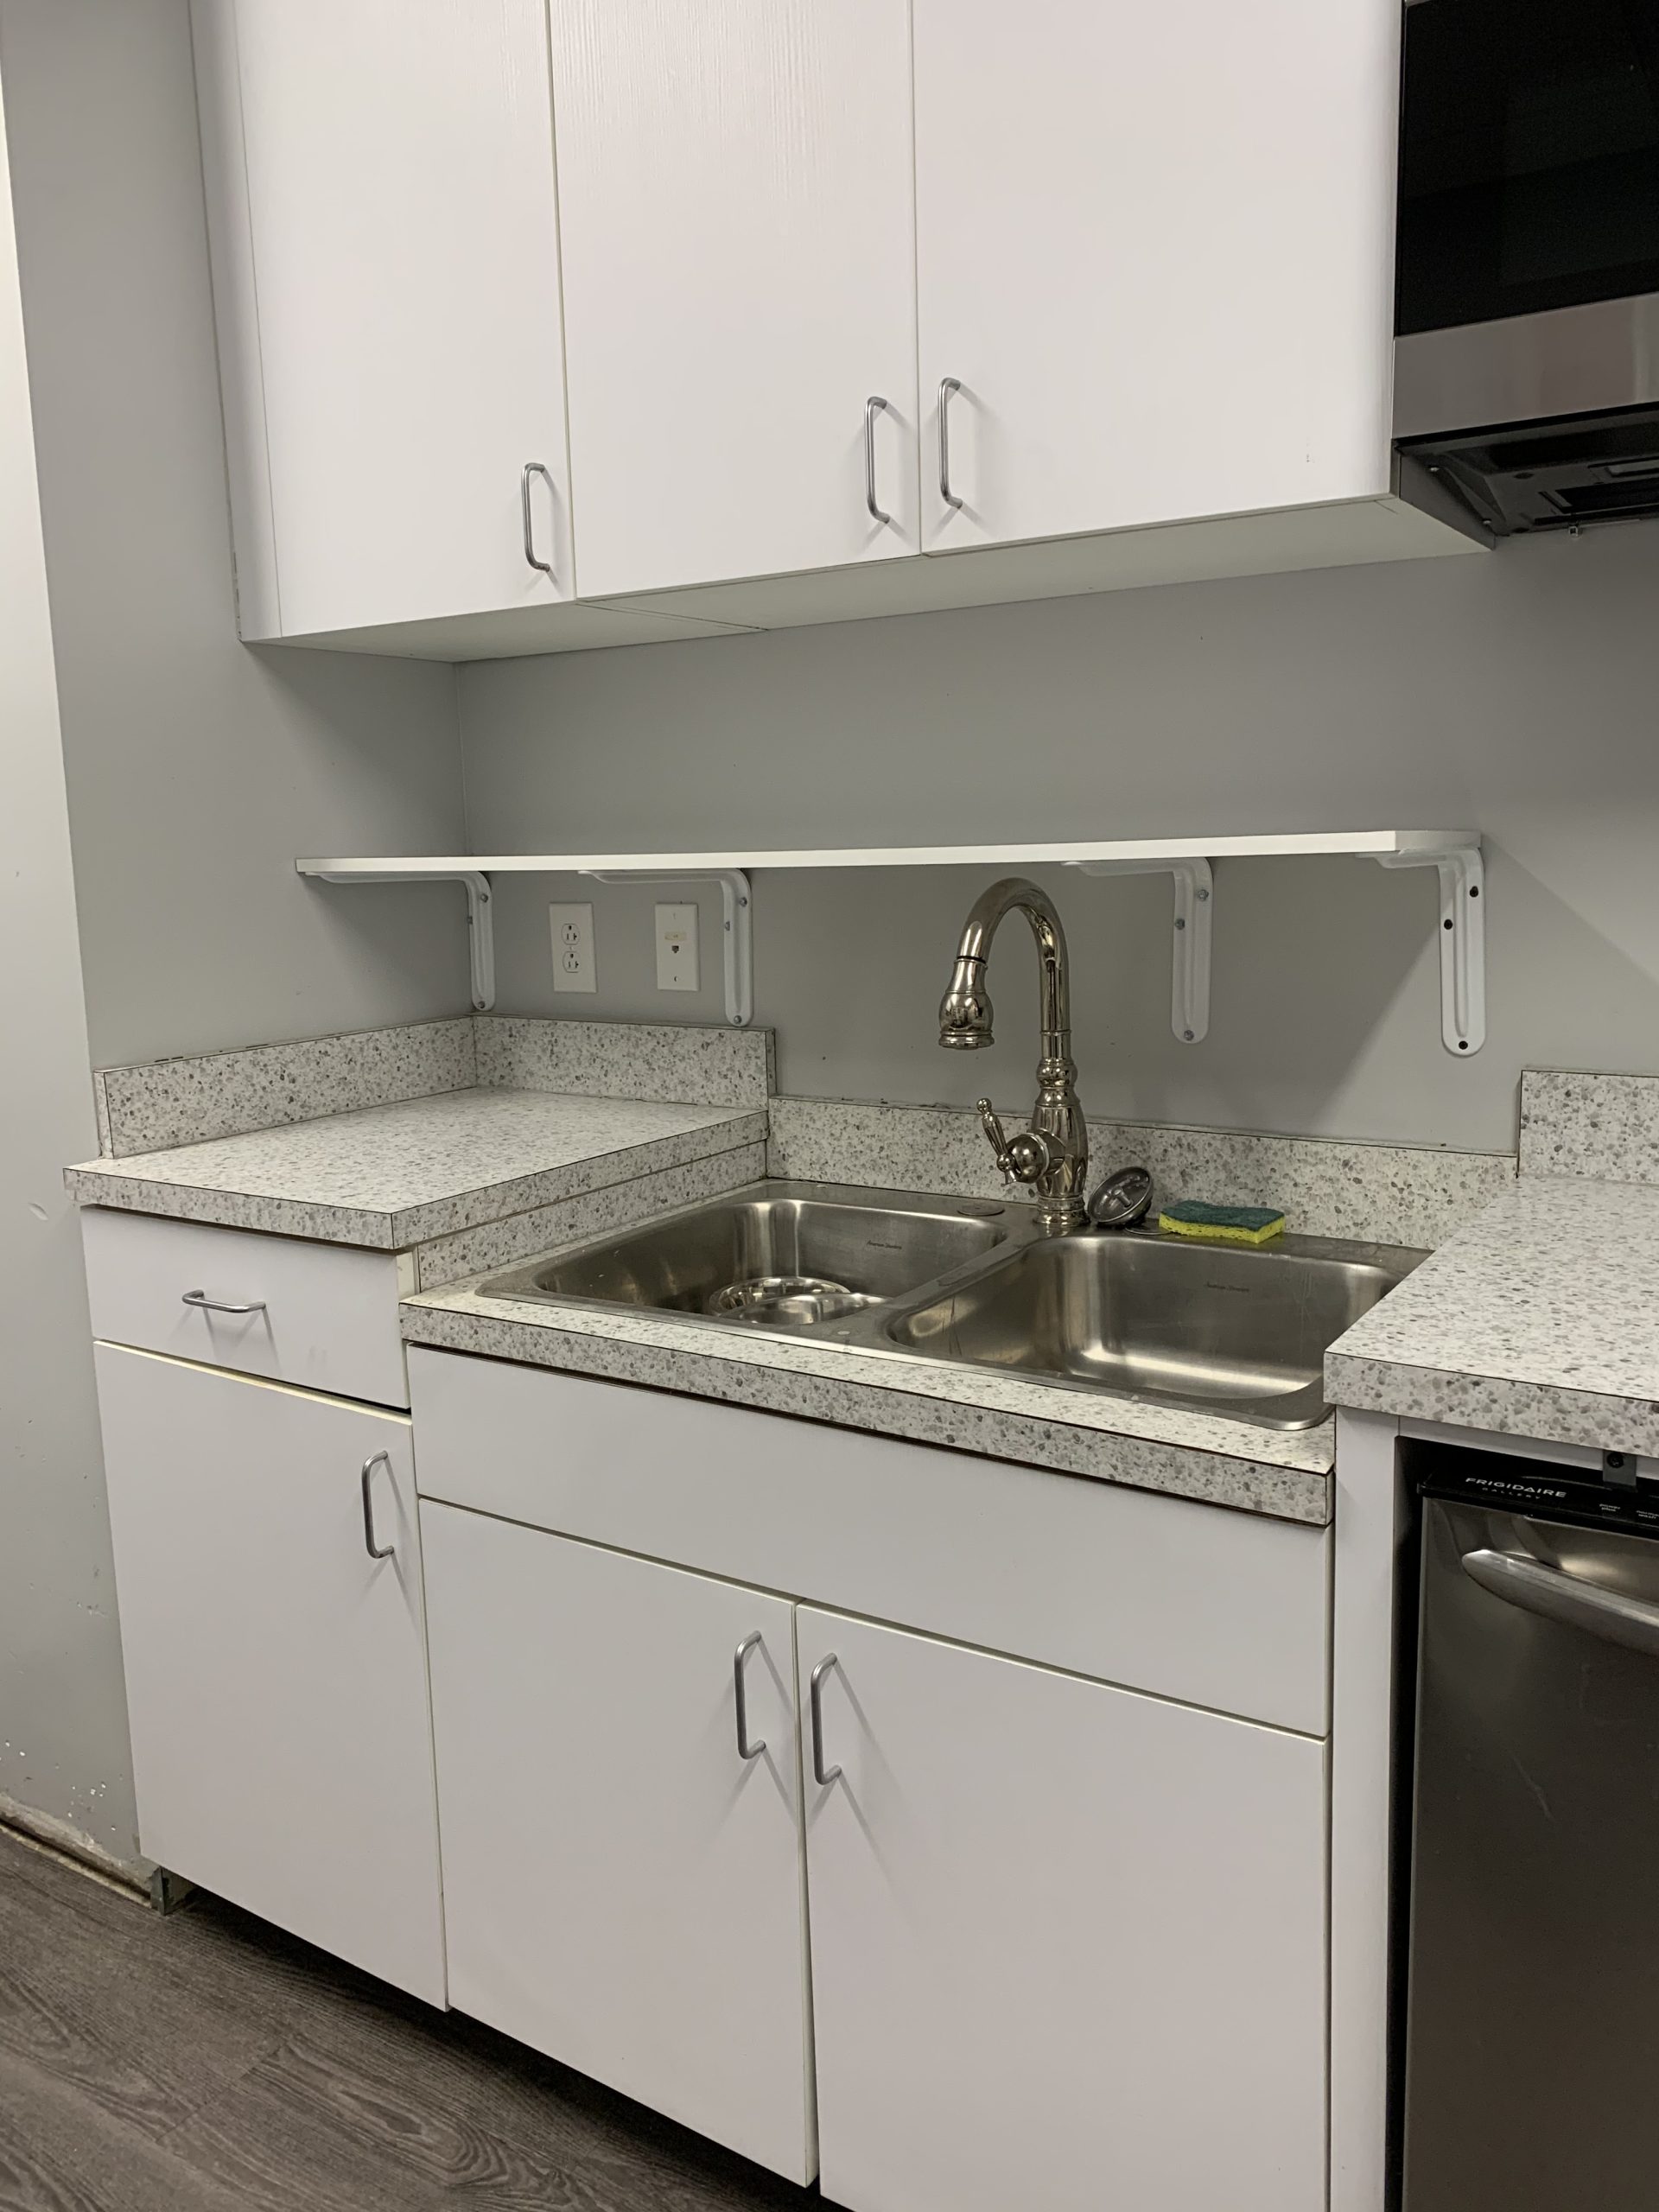 Home kitchen sink with tap